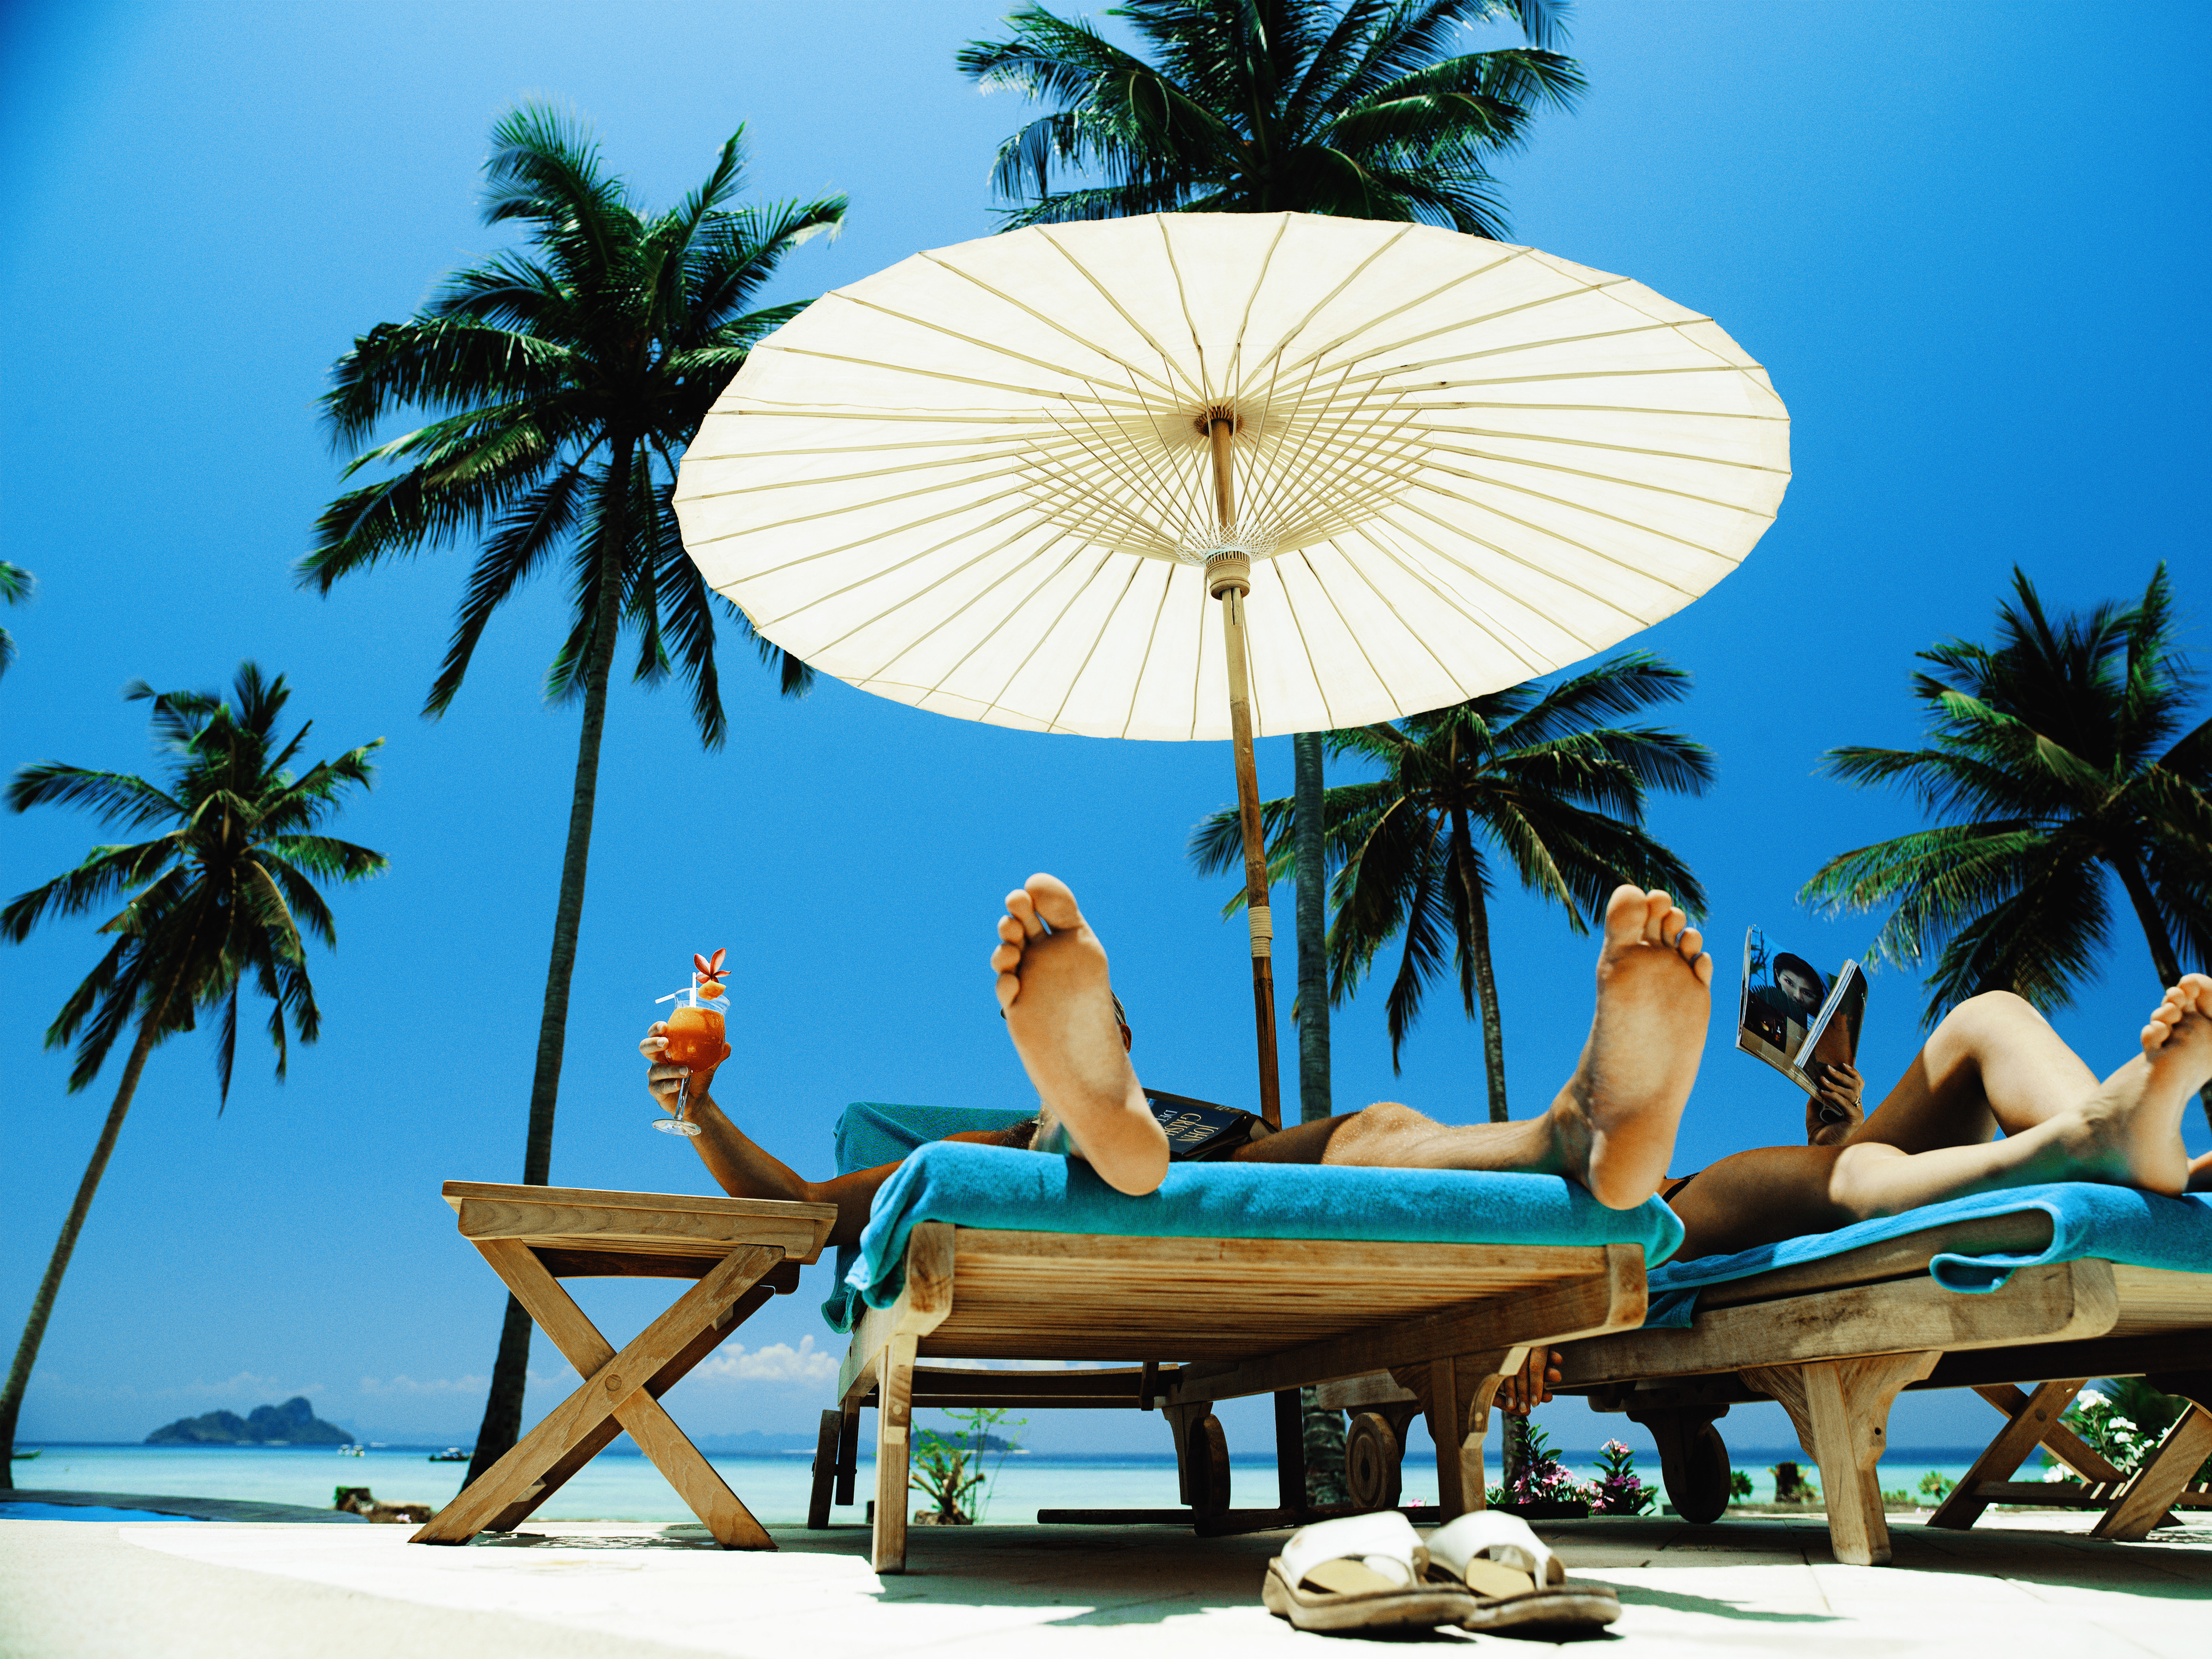 Two people relaxing on sun loungers under a large umbrella, tropical beach setting